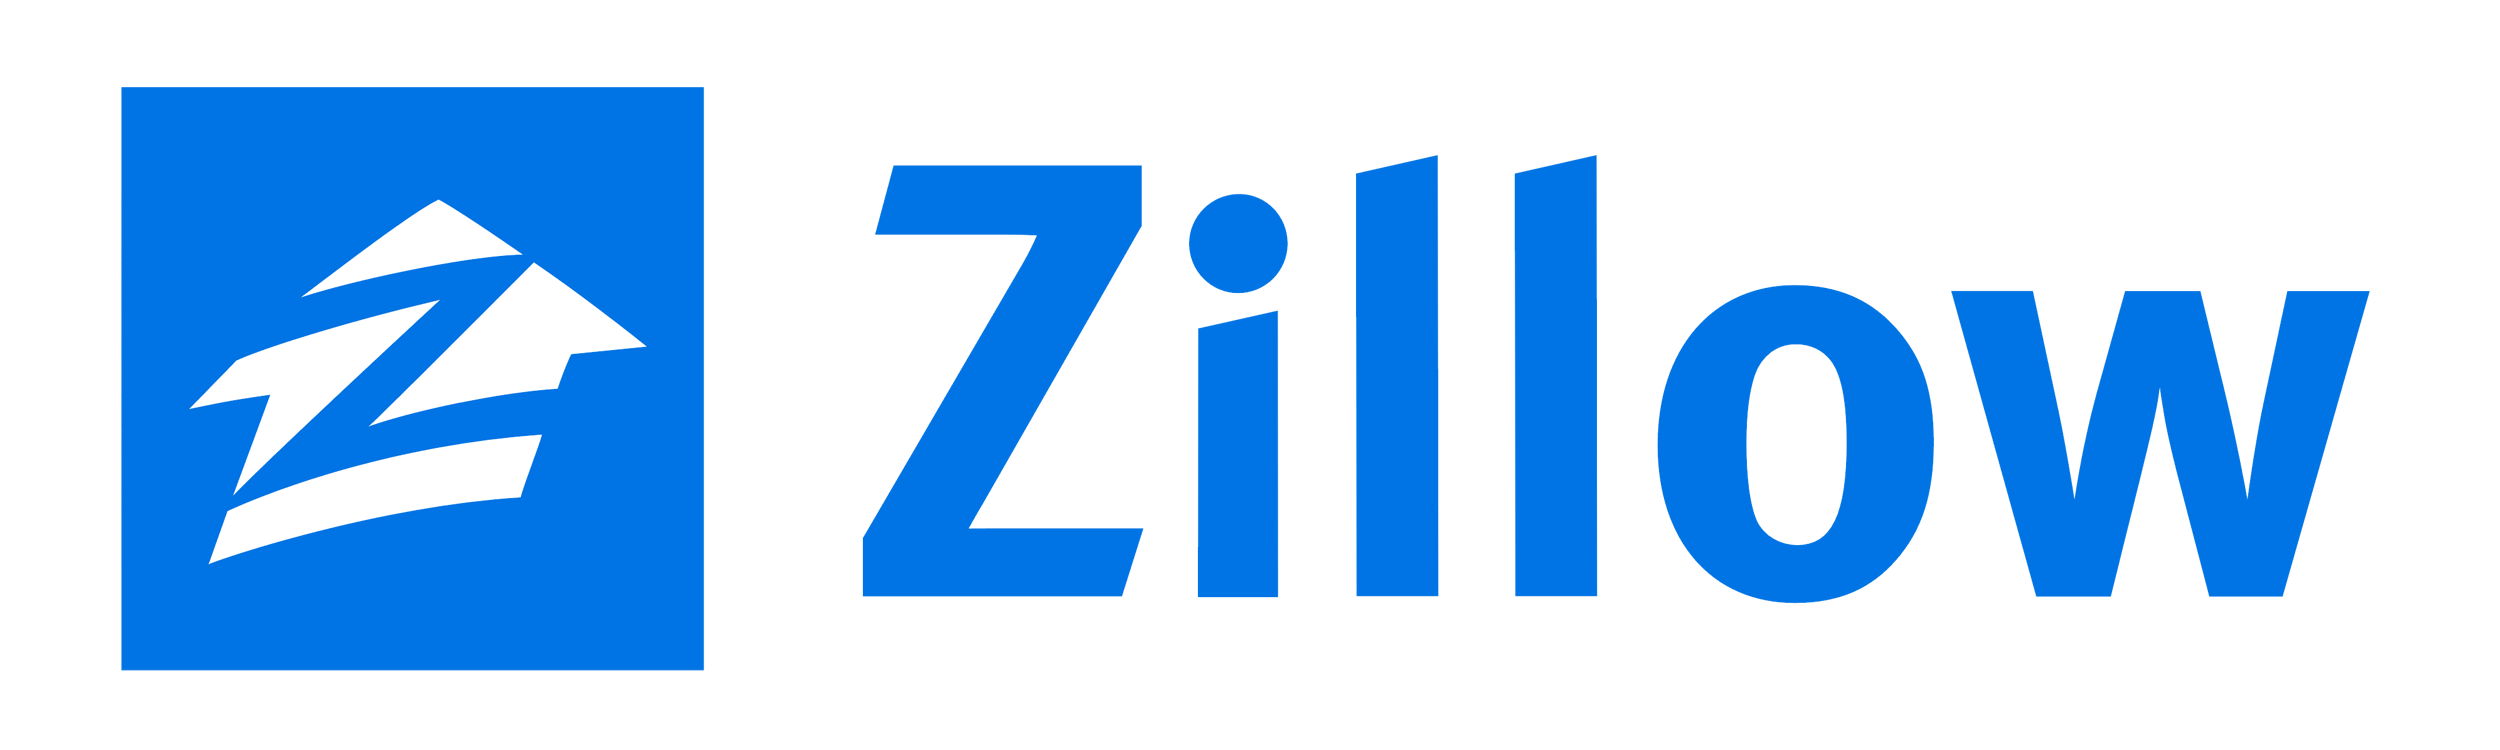 Zillow Logo, Zillow Symbol, Meaning, History and Evolution